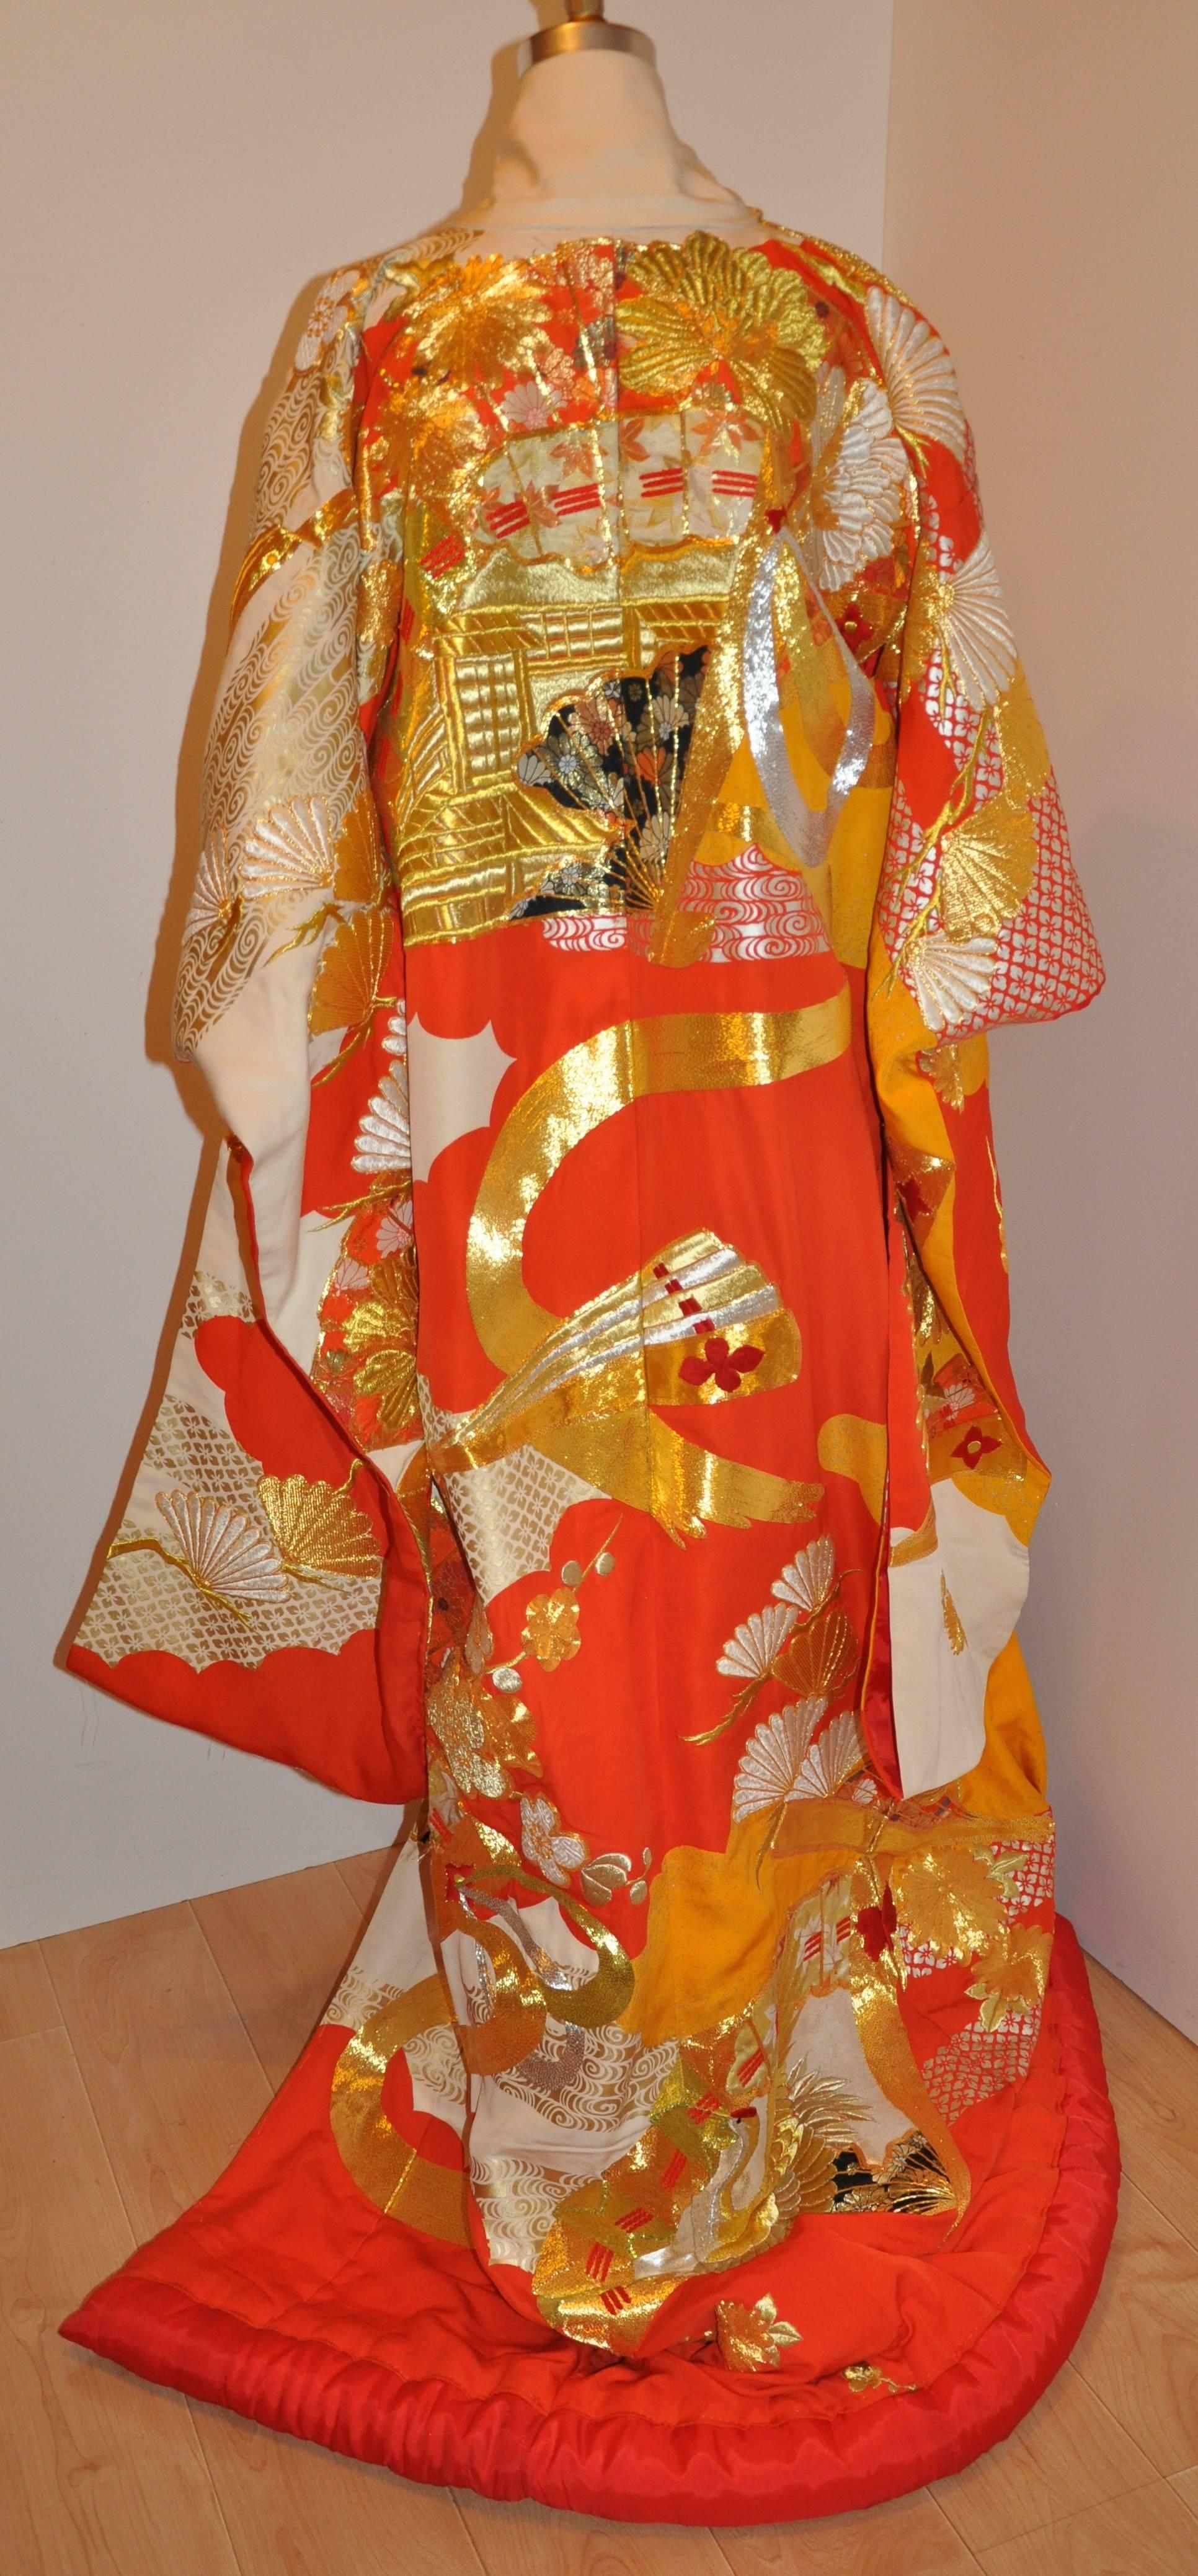           This simply wonderfully detailed ceremonial Japanese kimono of rich multi-colors, embroidered with gold and silver metallic threads, rich hand-embroidered brocades combined with silk textured ribbon of tangerines & creams. The wonderful